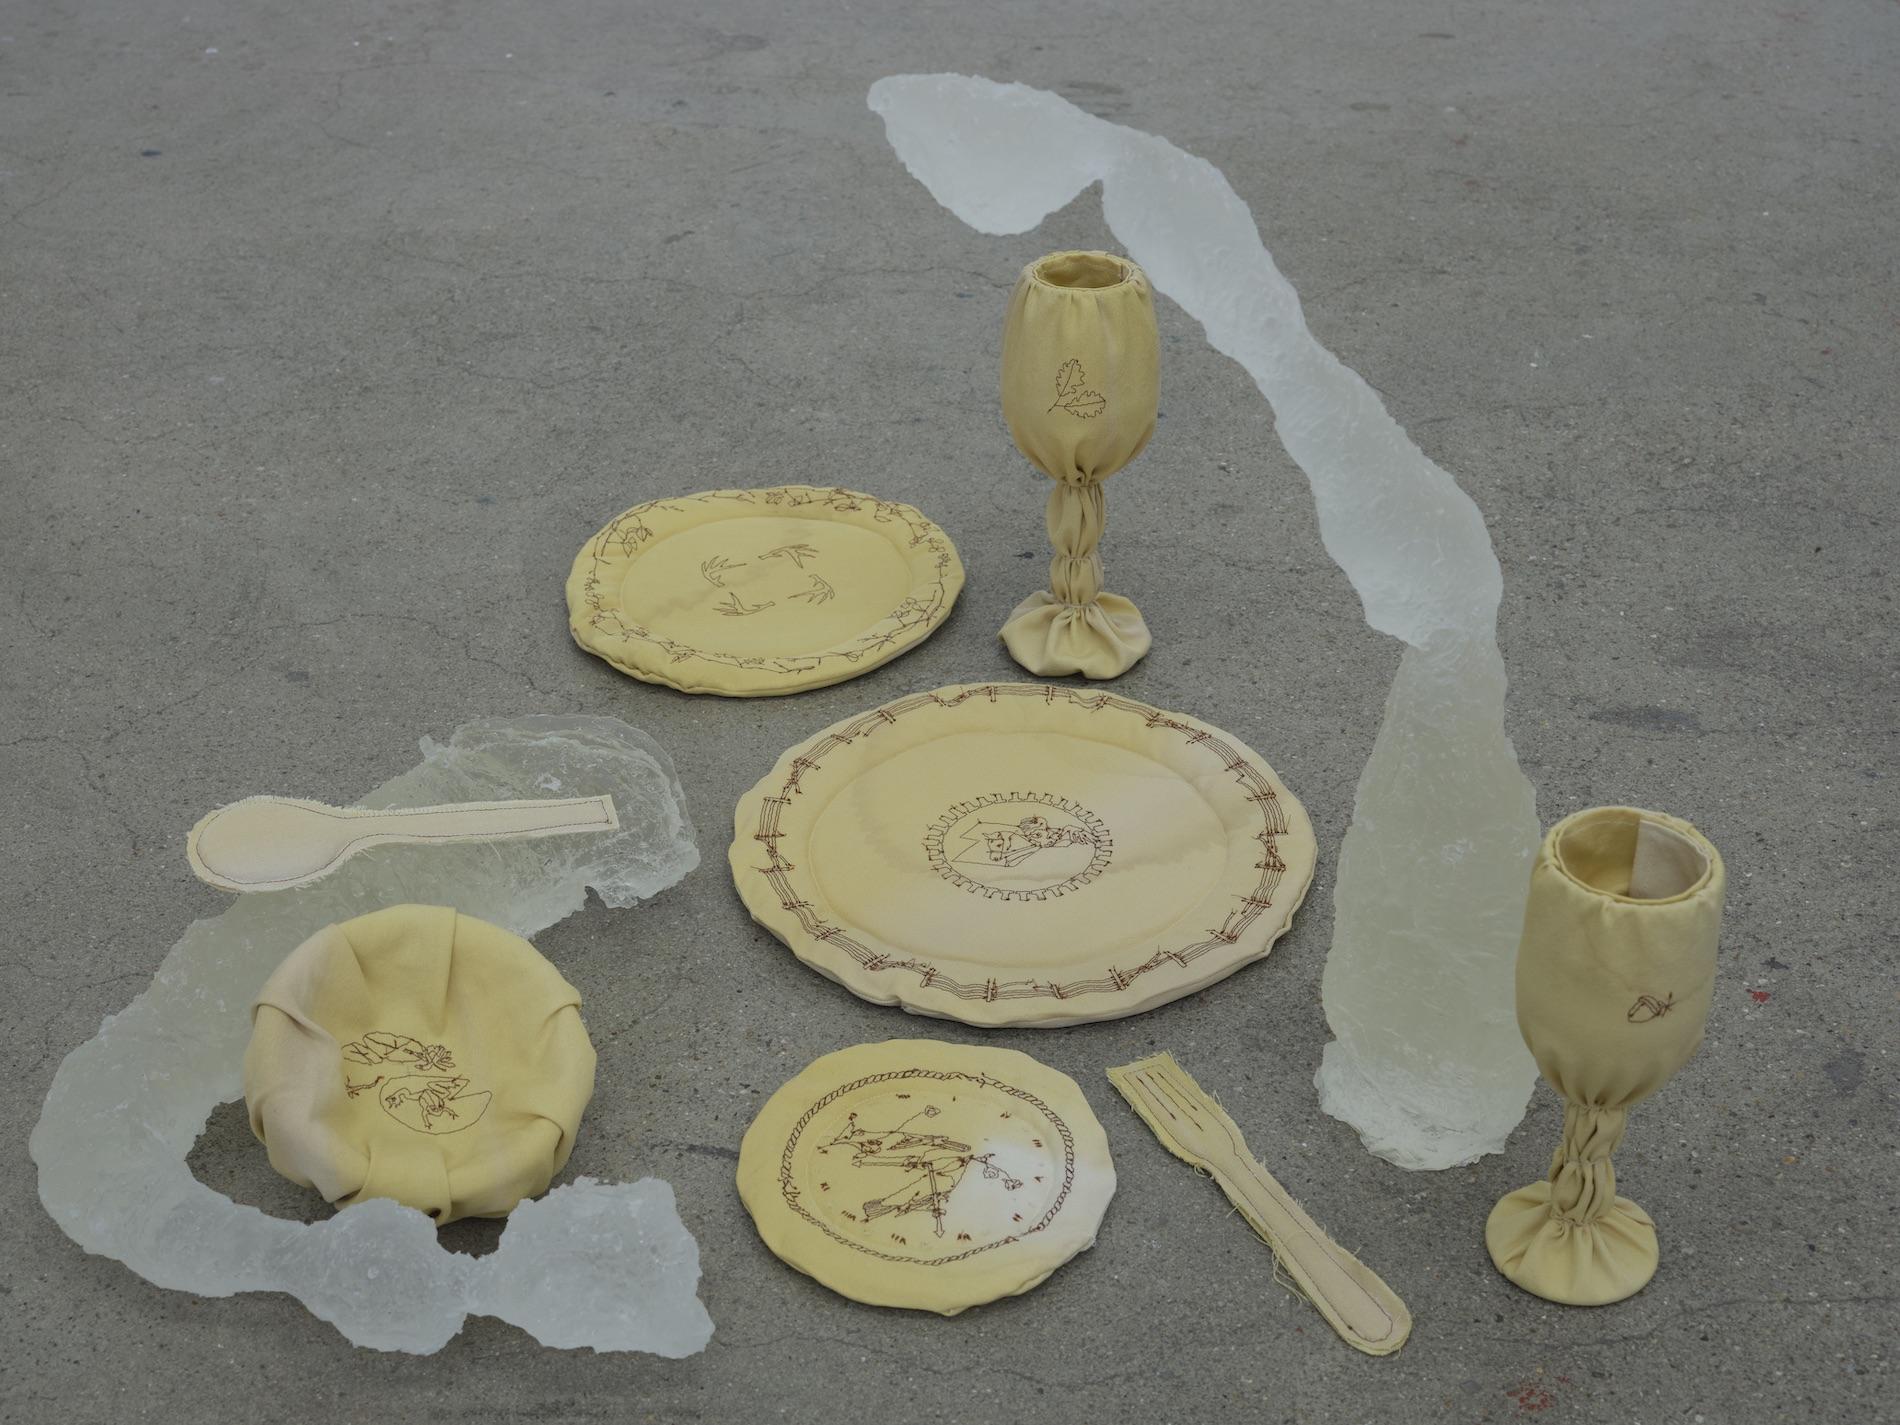 Dinnerware with sculptures Soft-Sculpture Series, 2022, archival family textiles, embroidery. Meghan Murphy